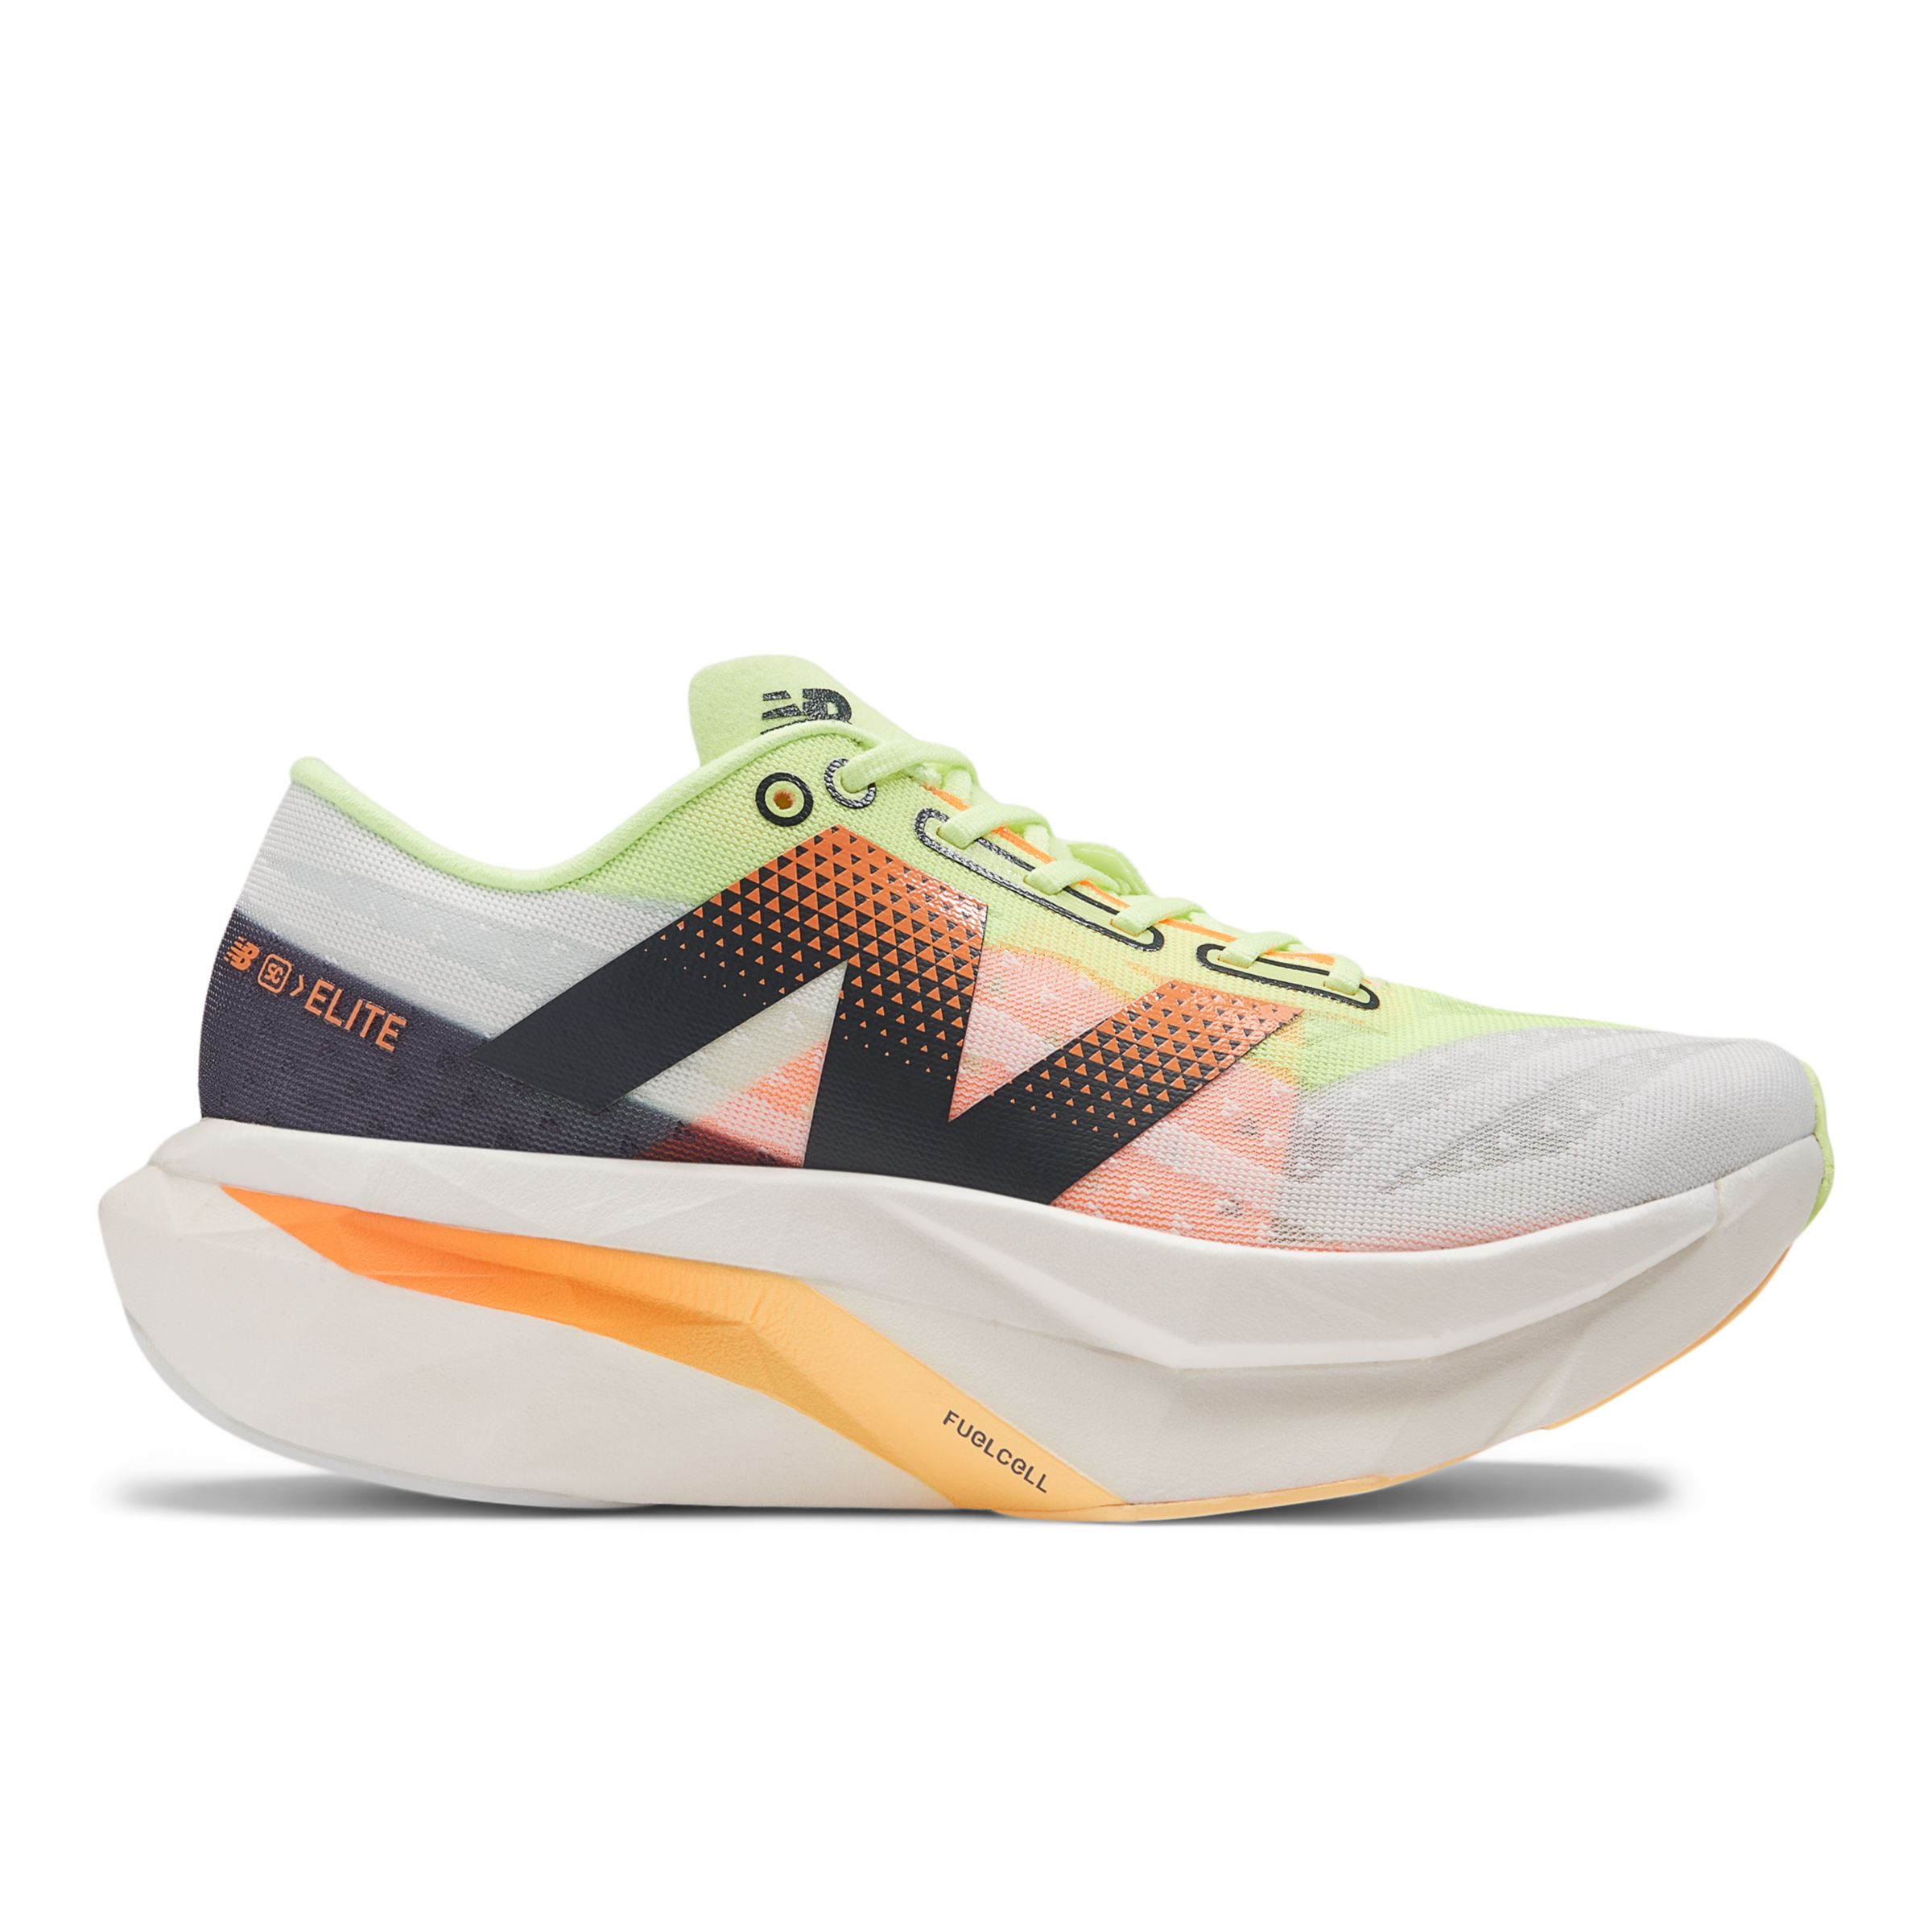 New Balance Women's Fuelcell Supercomp Elite V4 Running Shoes In White/green/orange